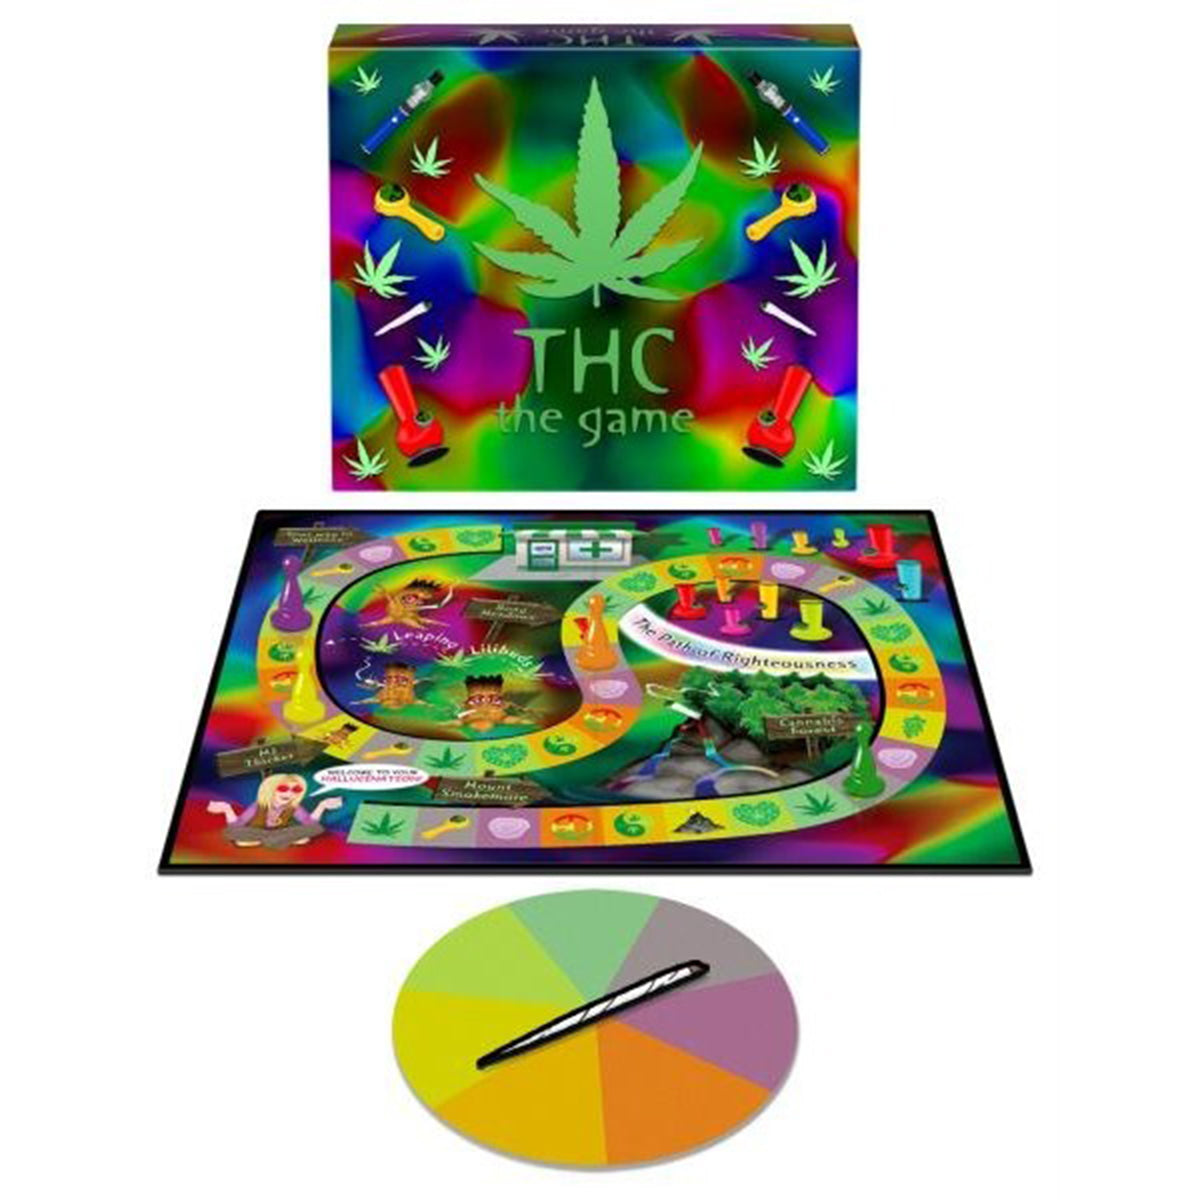 Thc The Game